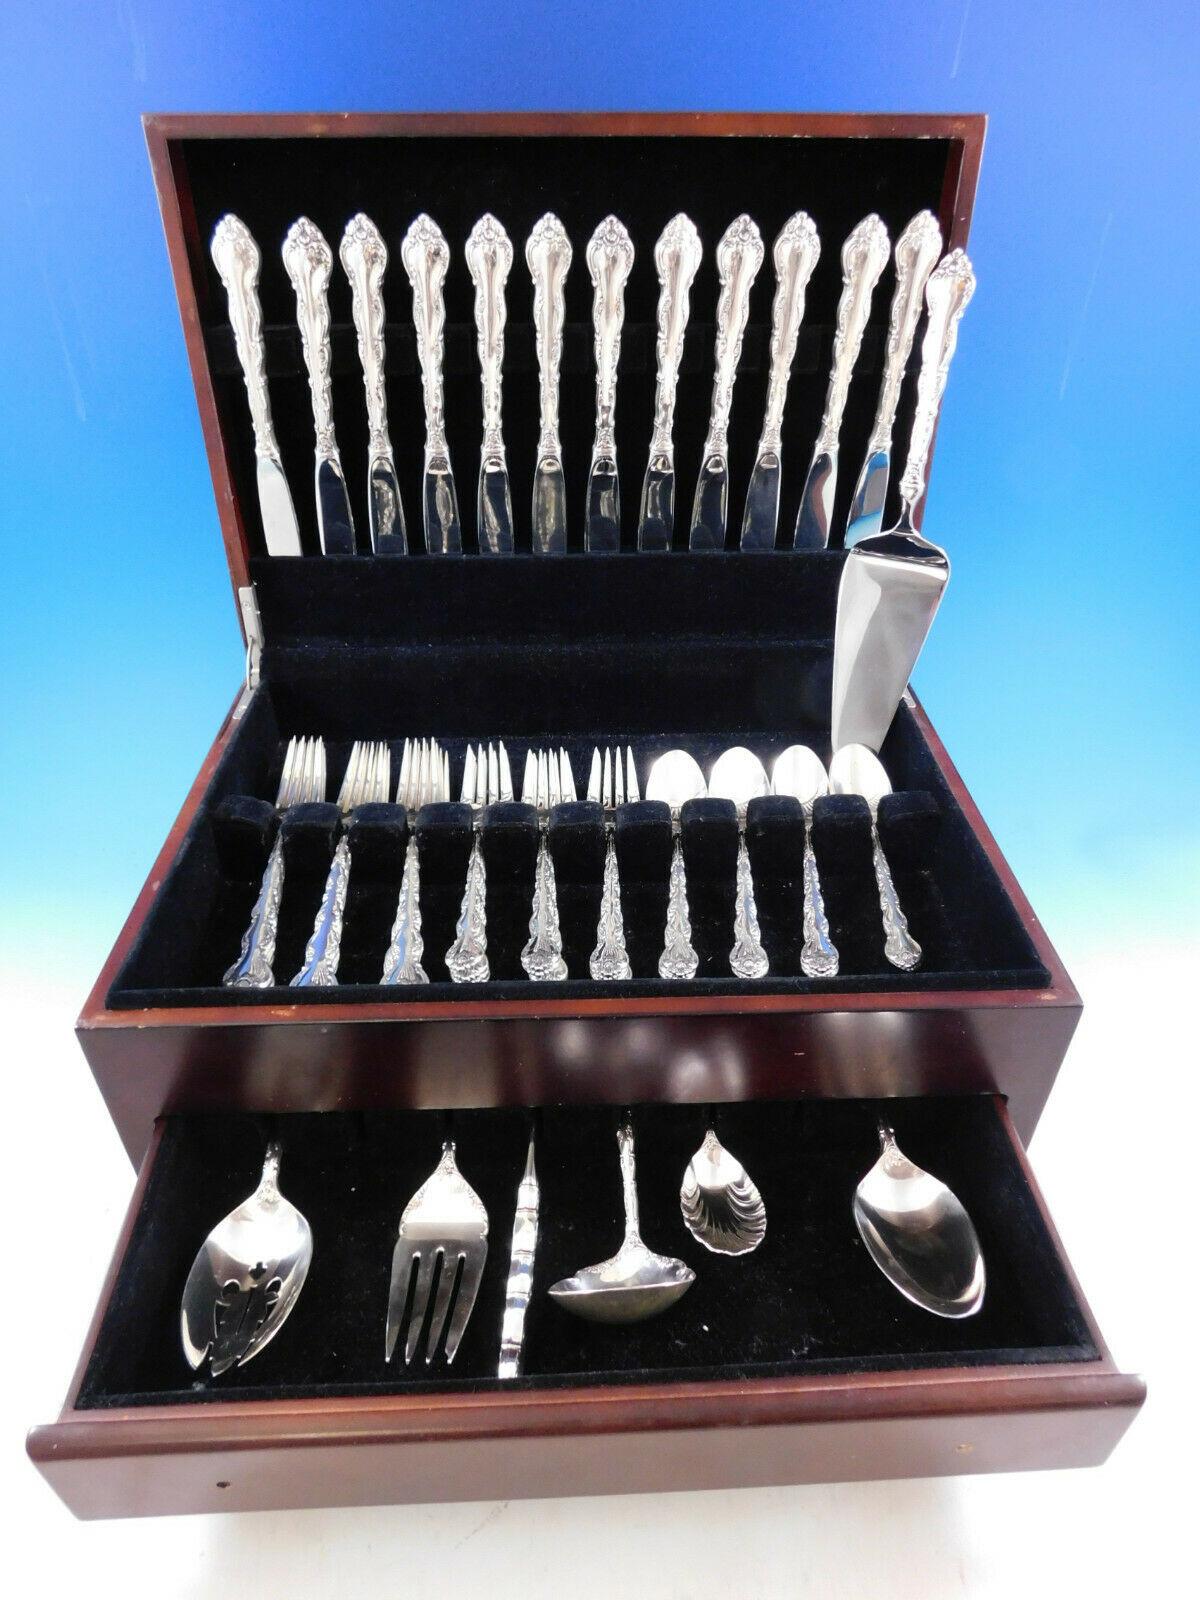 Feliciana by Wallace sterling silver flatware set - 55 pieces. This set includes:
12 knives, 9